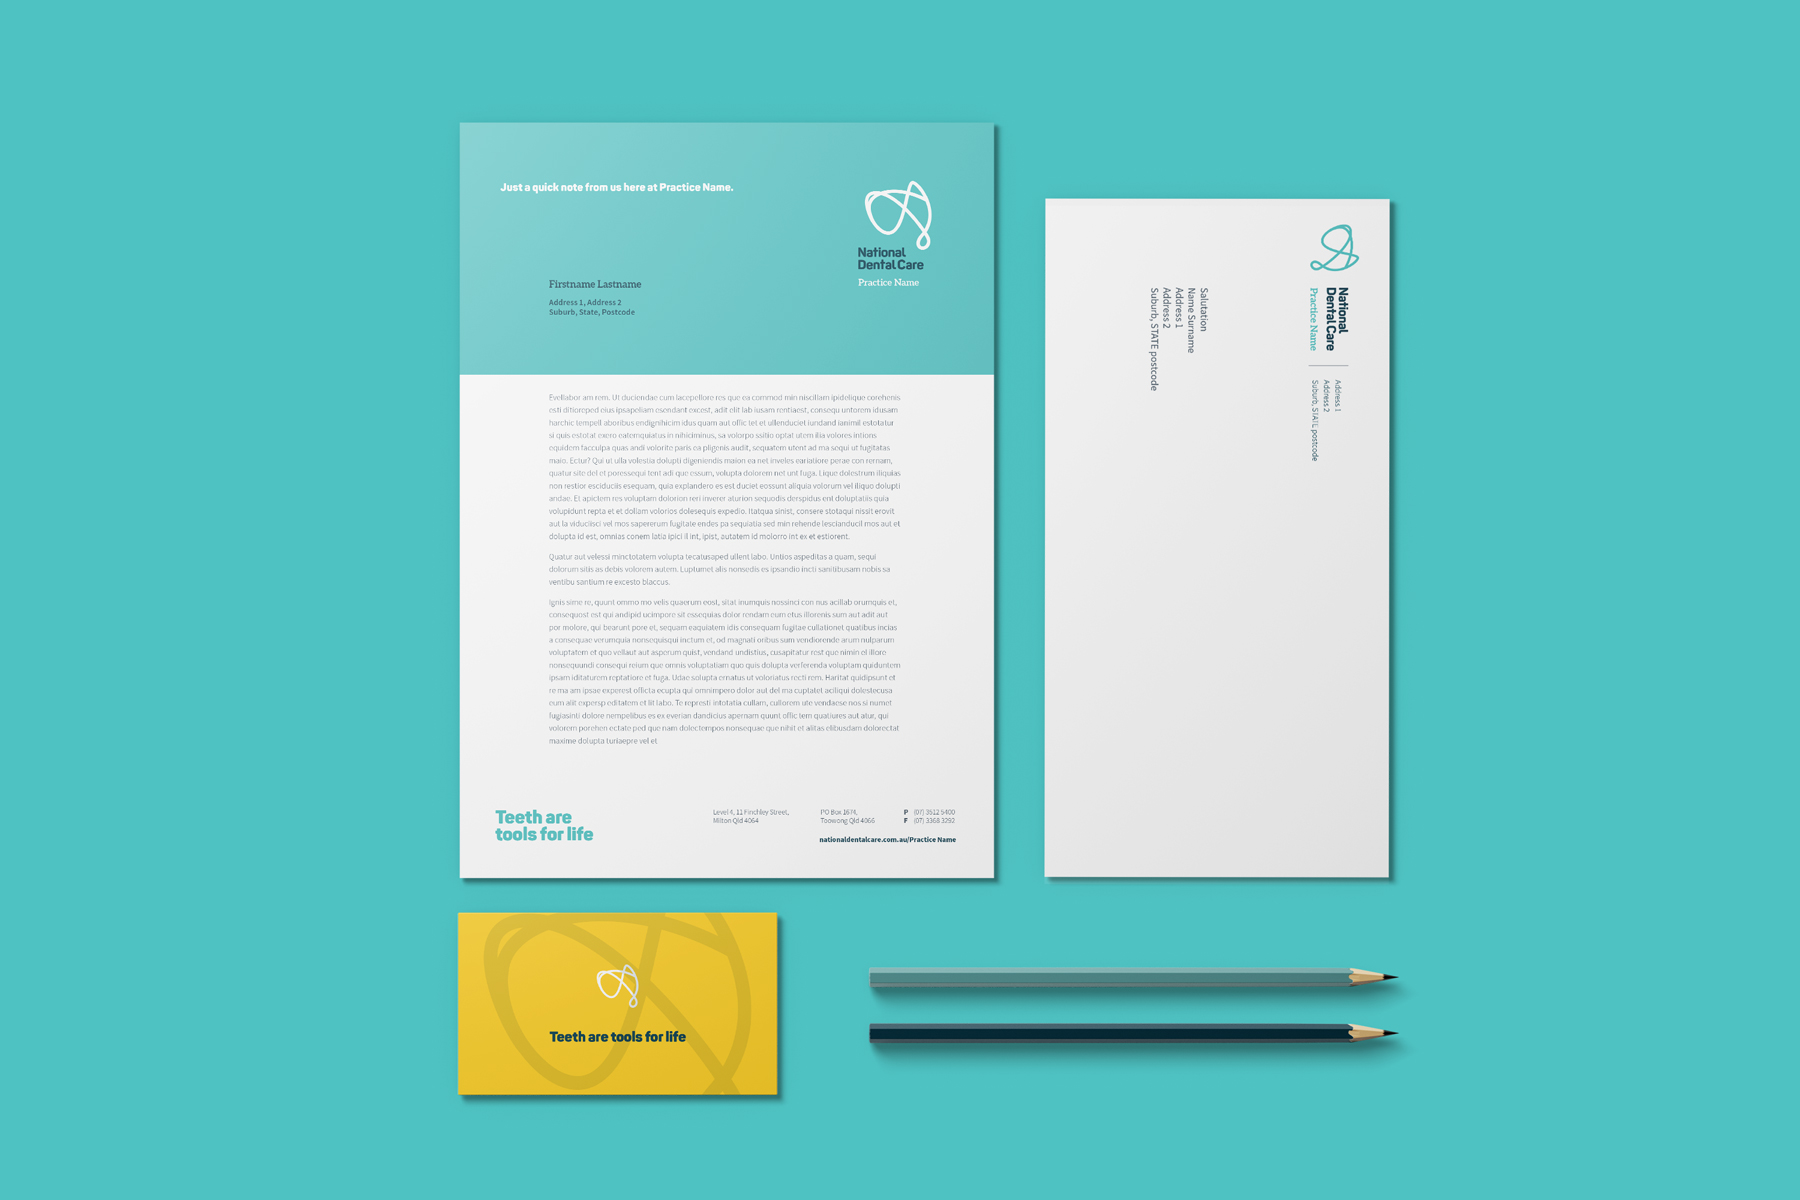 A visually appealing stationery mockup featuring a clean, minimalist design. The set includes a business card, envelope, and letterhead, all positioned against a neutral background. The business card showcases a modern, sleek layout with a logo, contact information, and subtle branding elements. The envelope and letterhead are coordinated, featuring consistent branding, typography, and color scheme. The overall presentation highlights professionalism and cohesive corporate identity, ideal for businesses seeking polished, high-quality stationery designs.